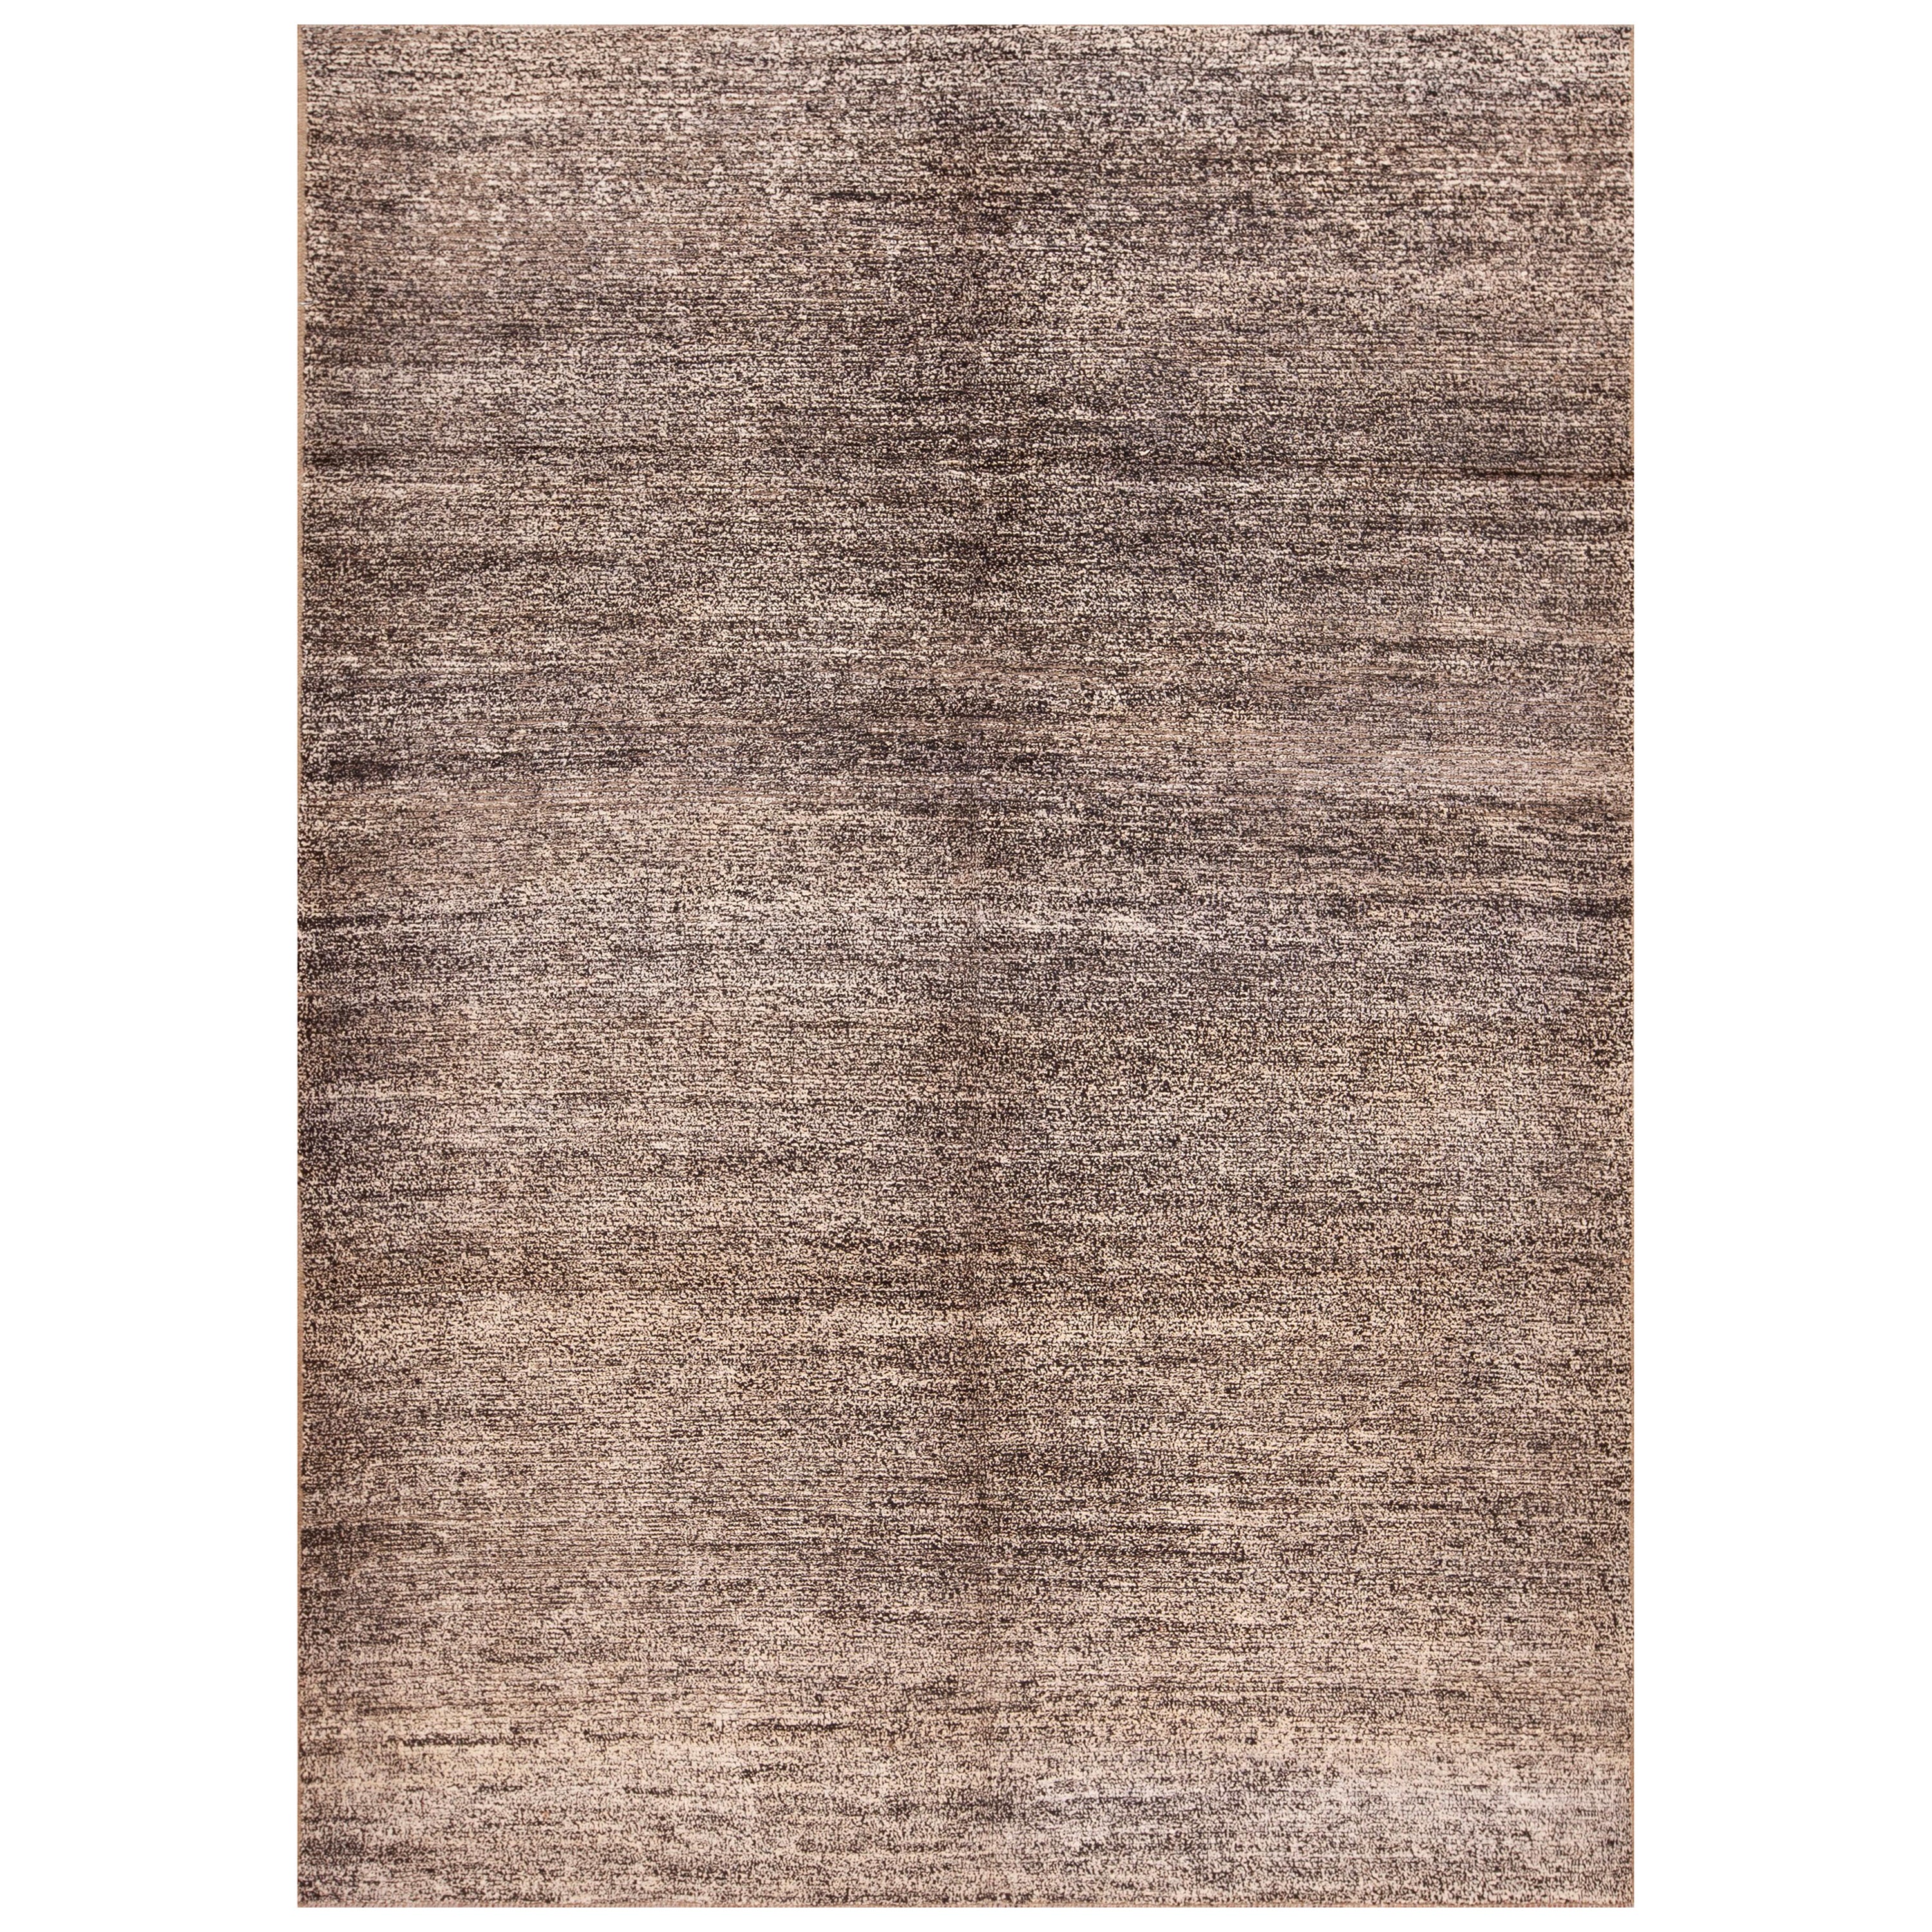 Nazmiyal Collection Abstract Salt and Pepper Color Modern Area Rug 6'6" x 9" For Sale